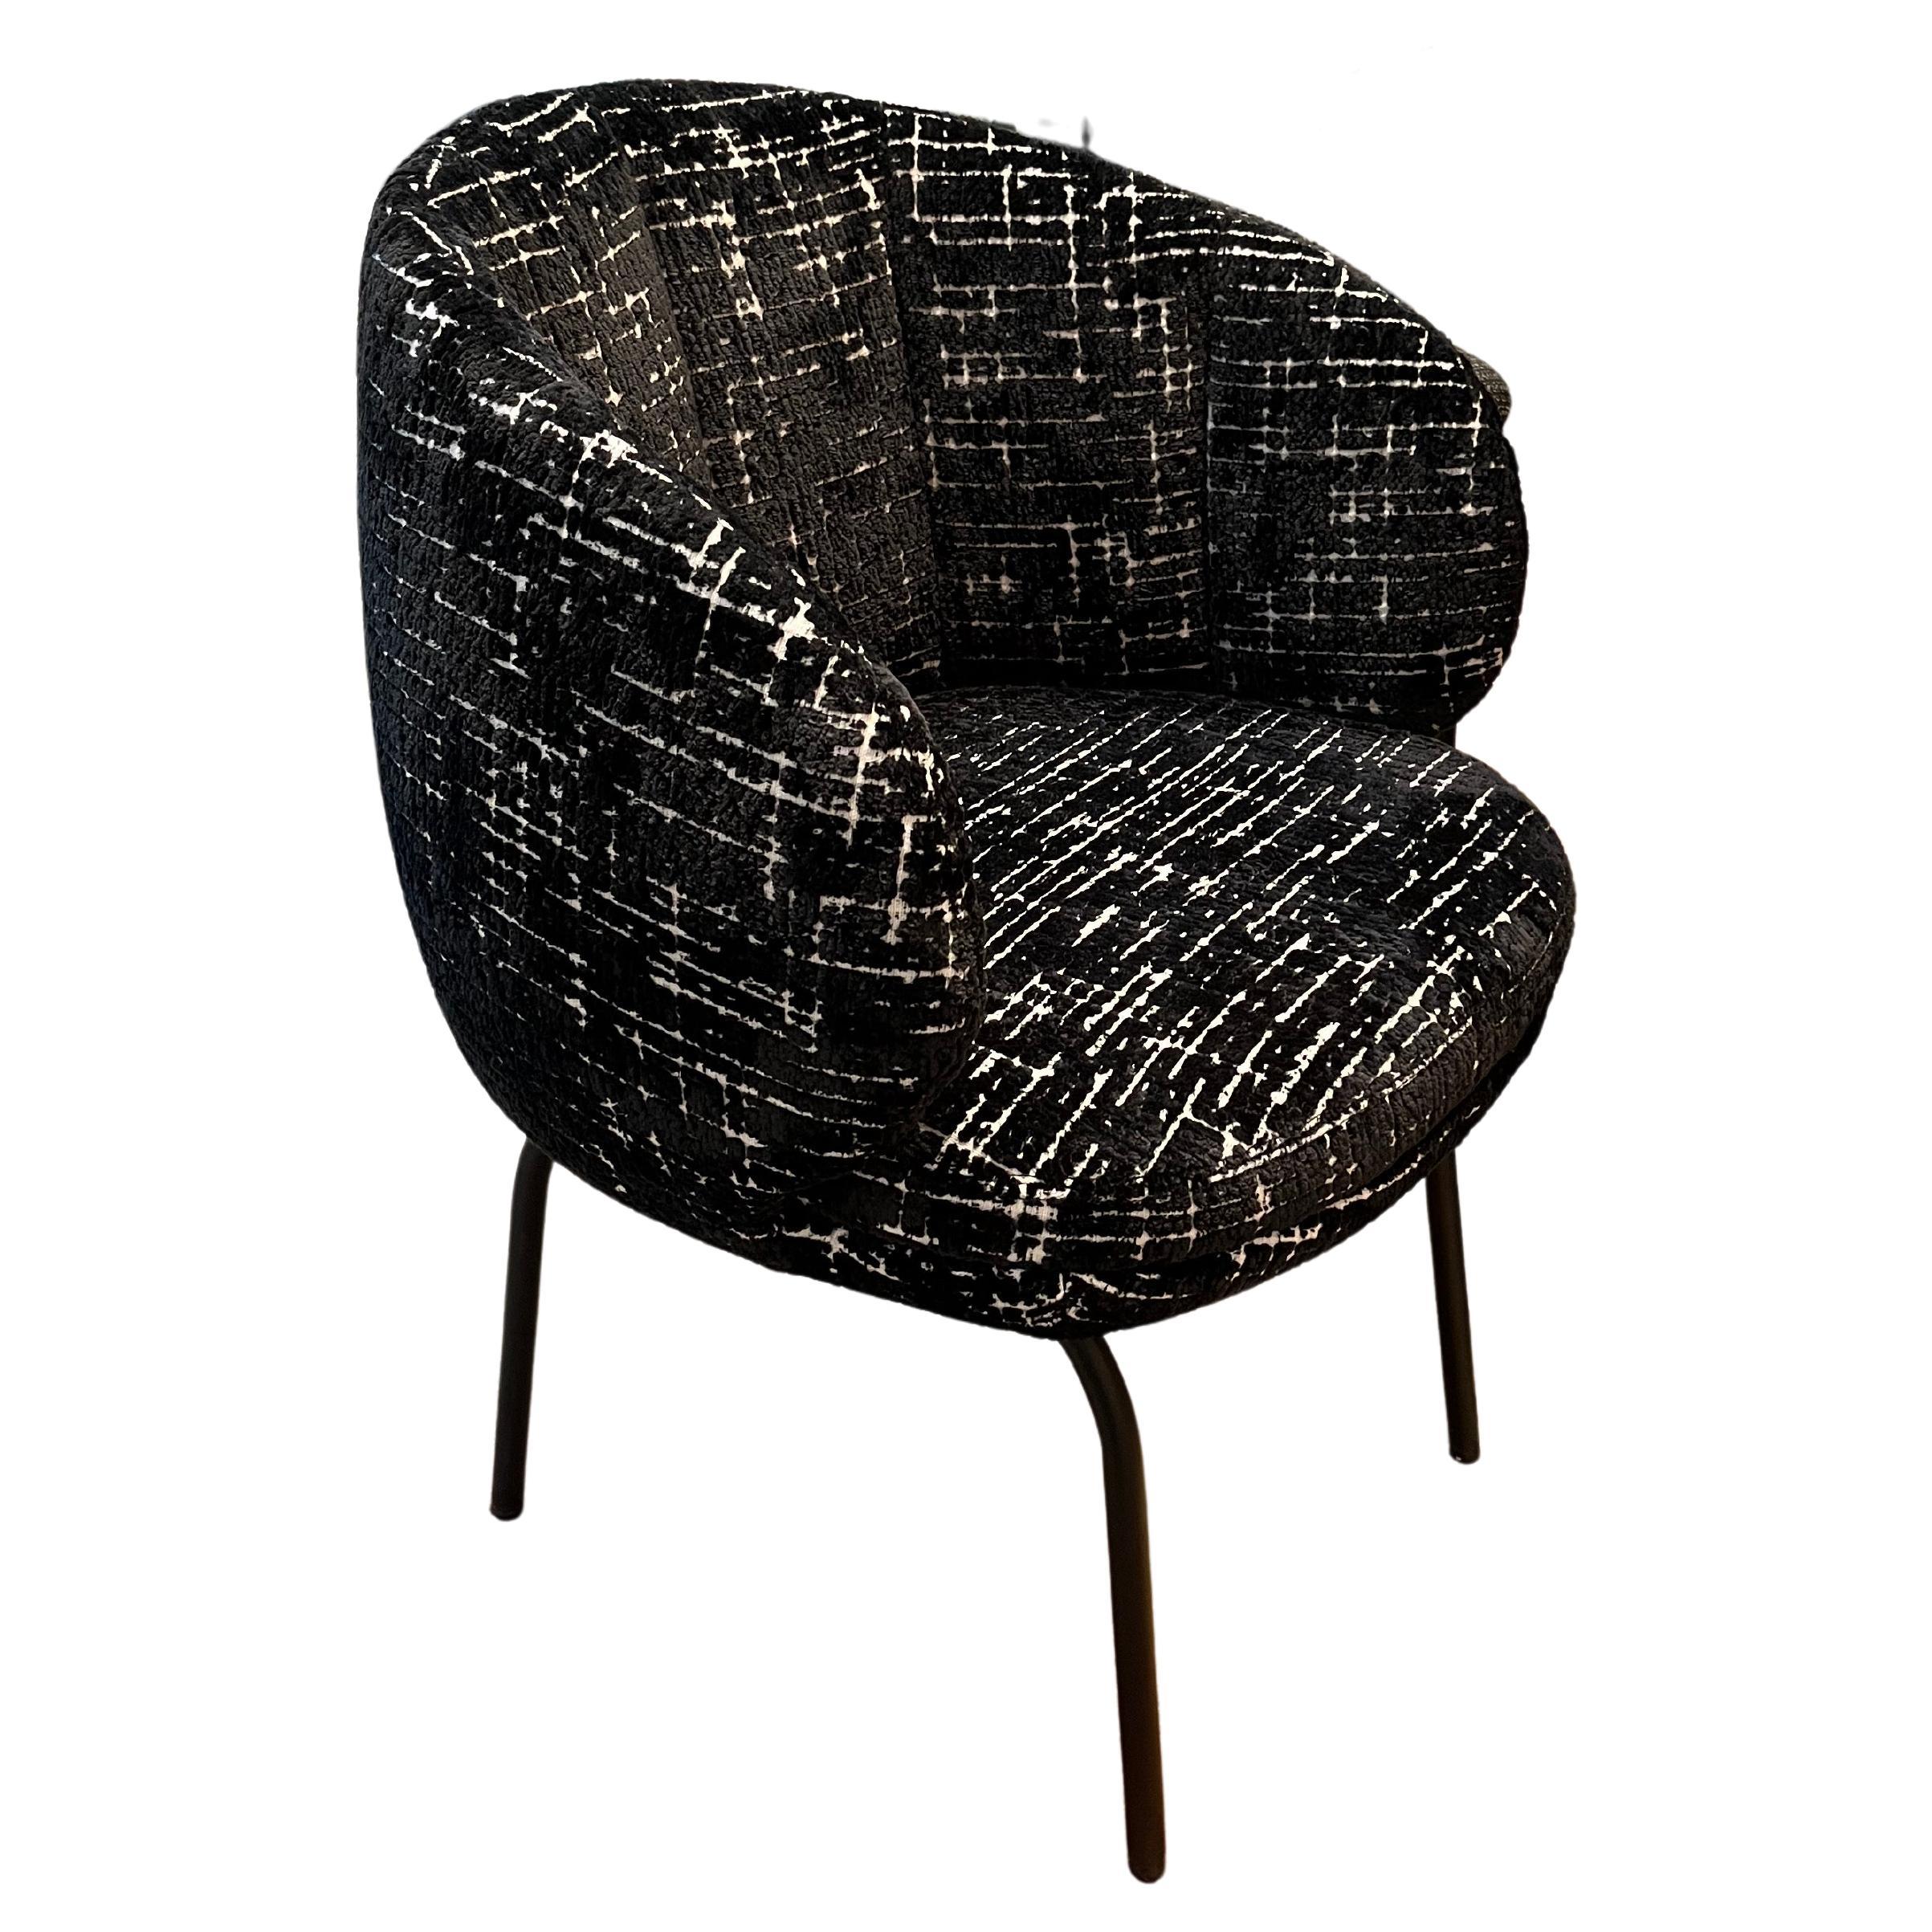 Wittmann Vuelta Fd Armchair Designed by Jaime Hayon in Stock For Sale